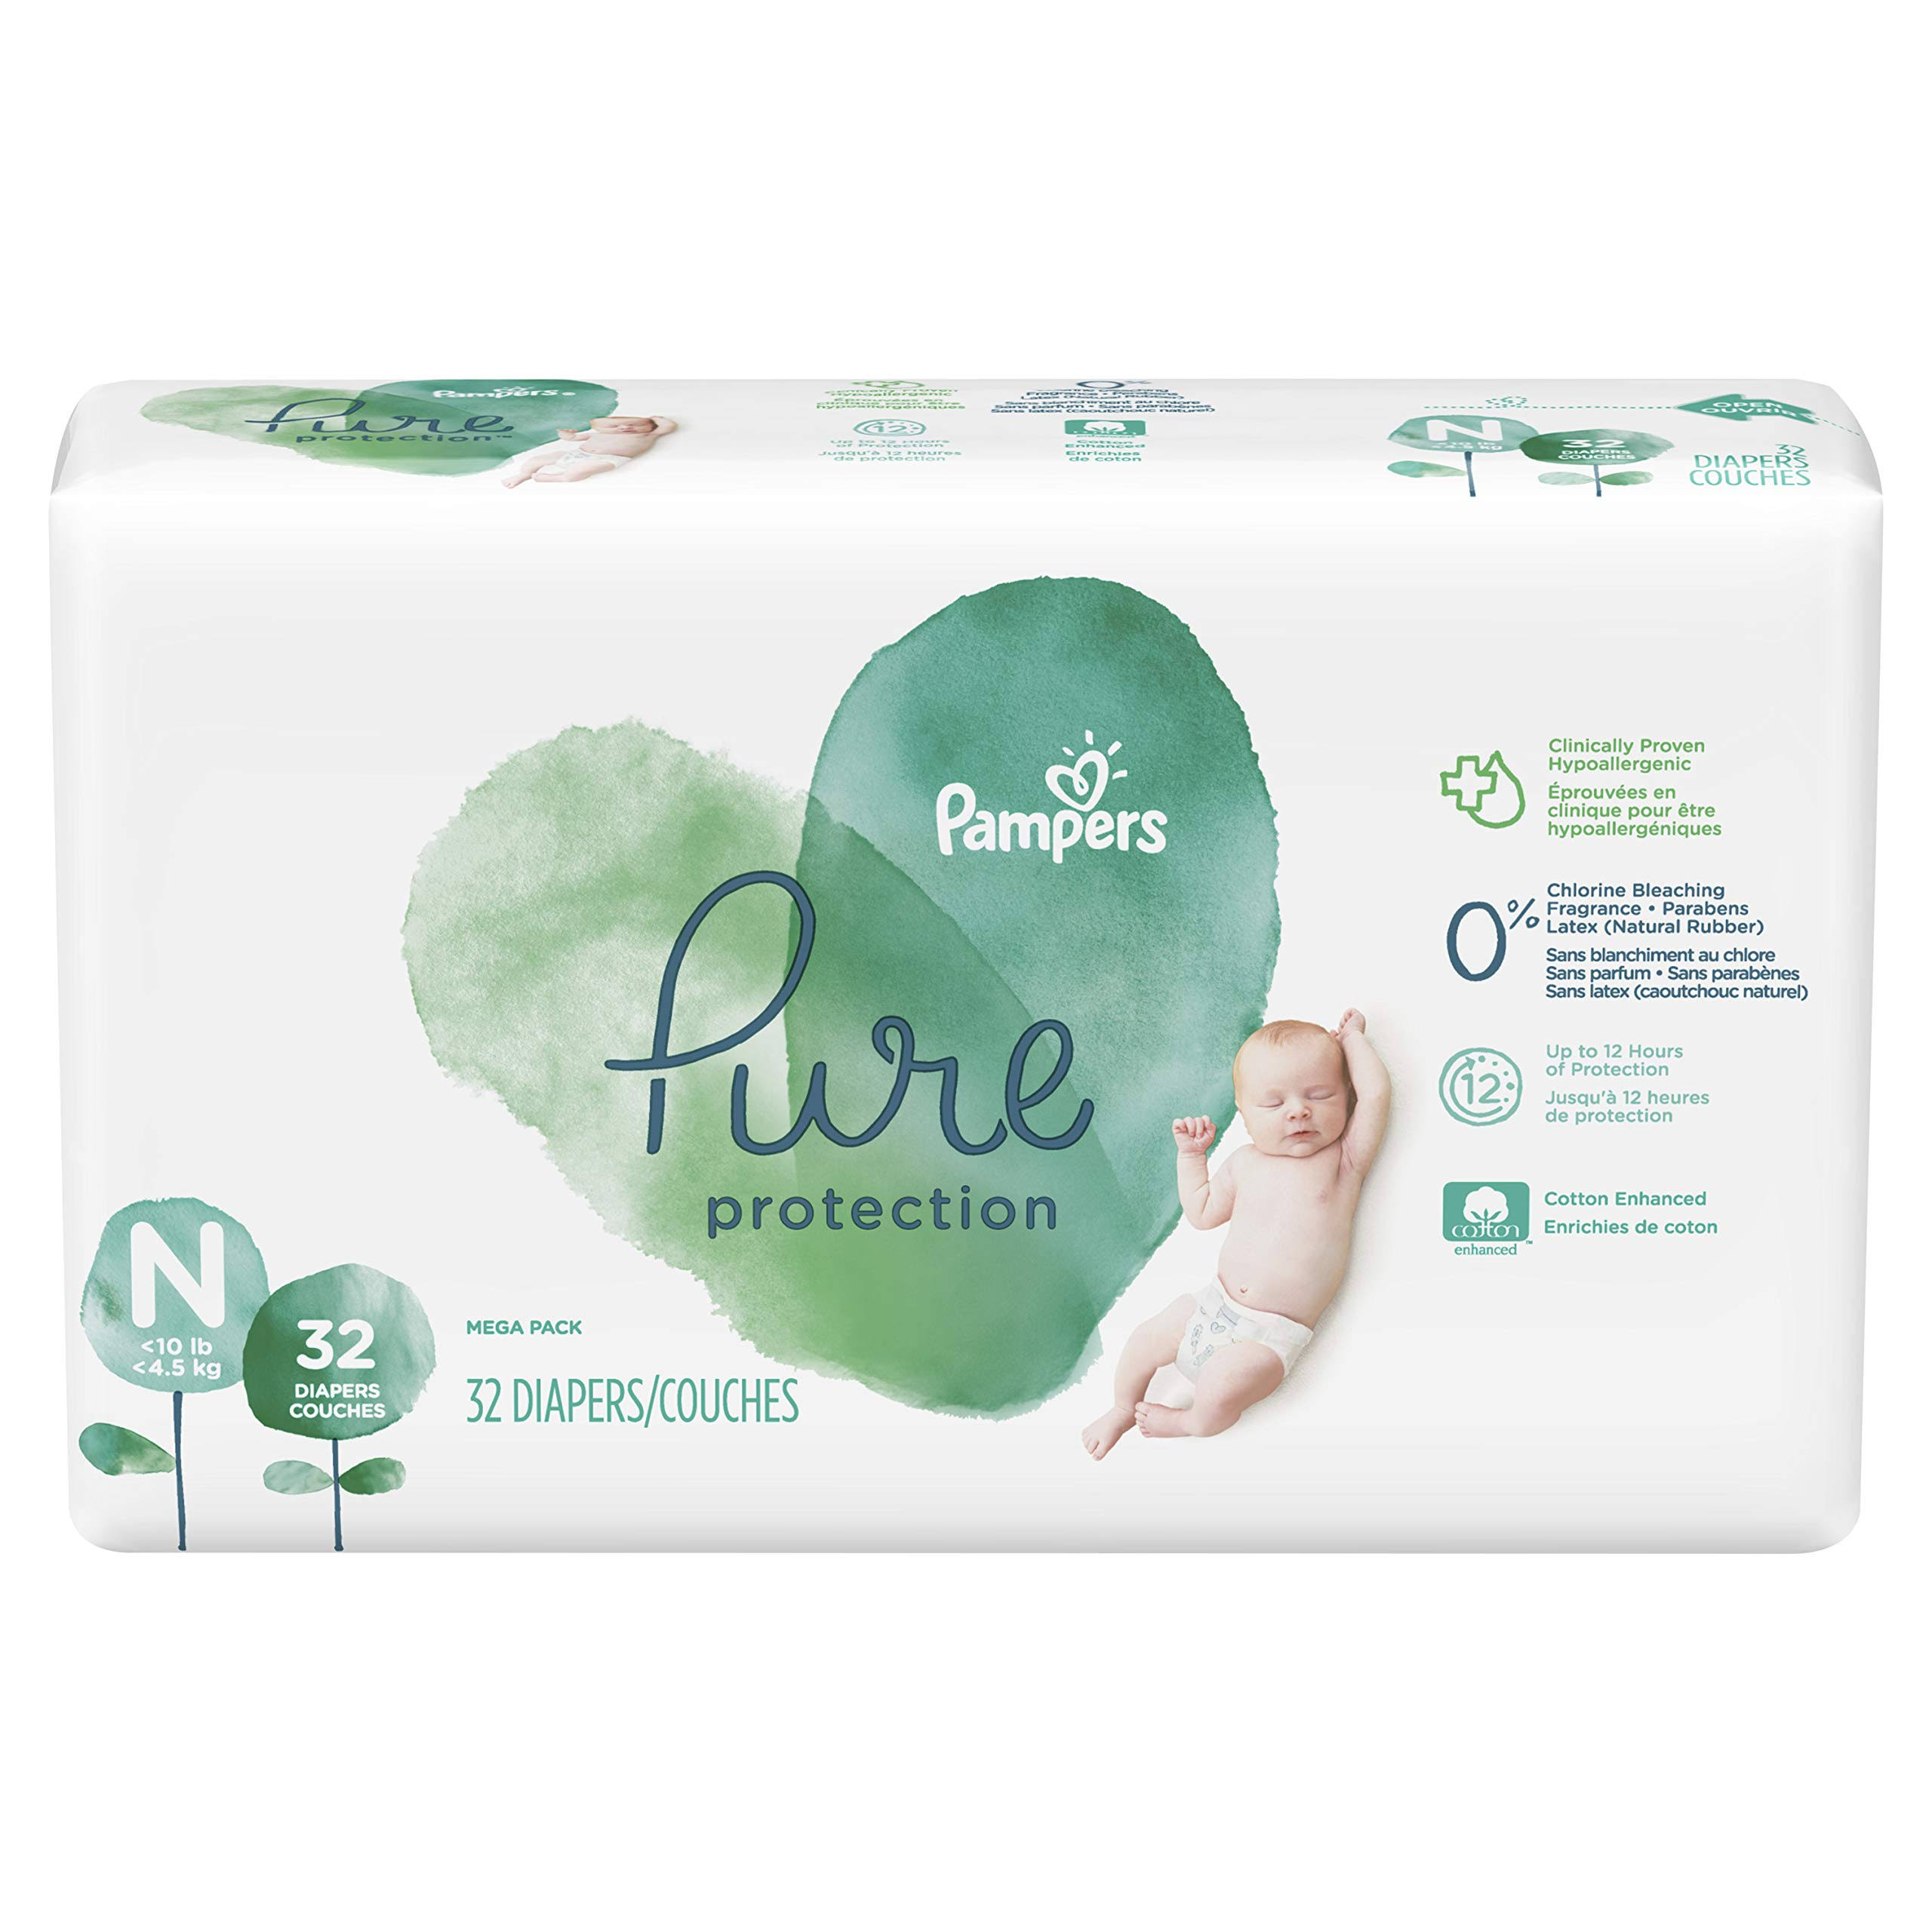 Pampers Pure Protection Newborn Disposable Baby Diapers - Size N, 32ct